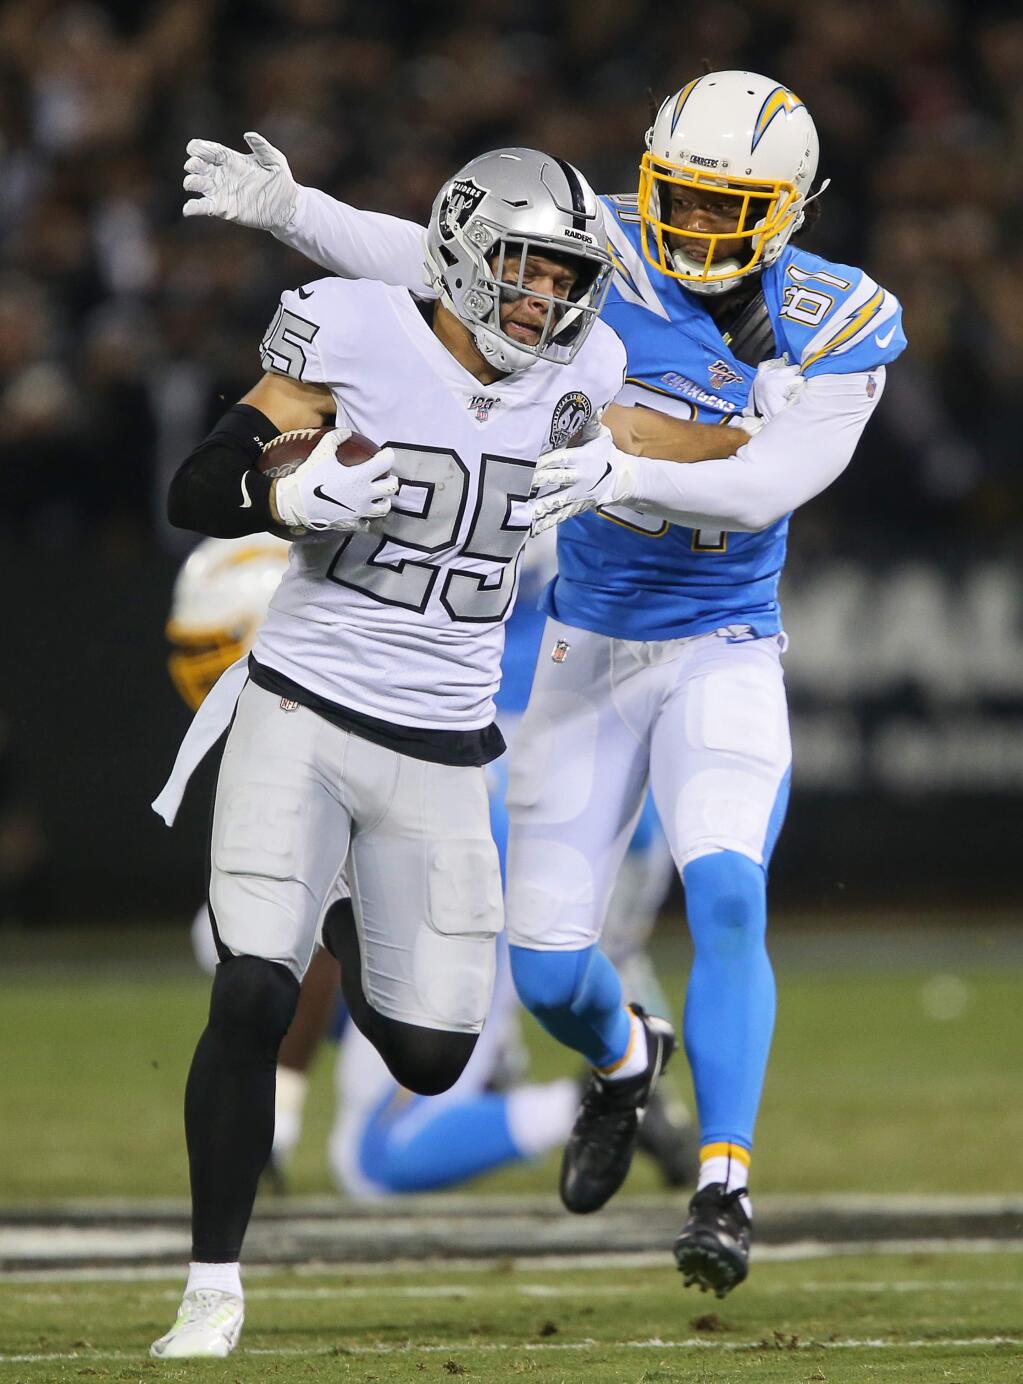 Oakland Raiders free safety Erik Harris tries to evade Los Angeles Chargers wide receiver Mike Williams after intercepting a pass during their game in Oakland on Thursday, November 7, 2019. (Christopher Chung/ The Press Democrat)